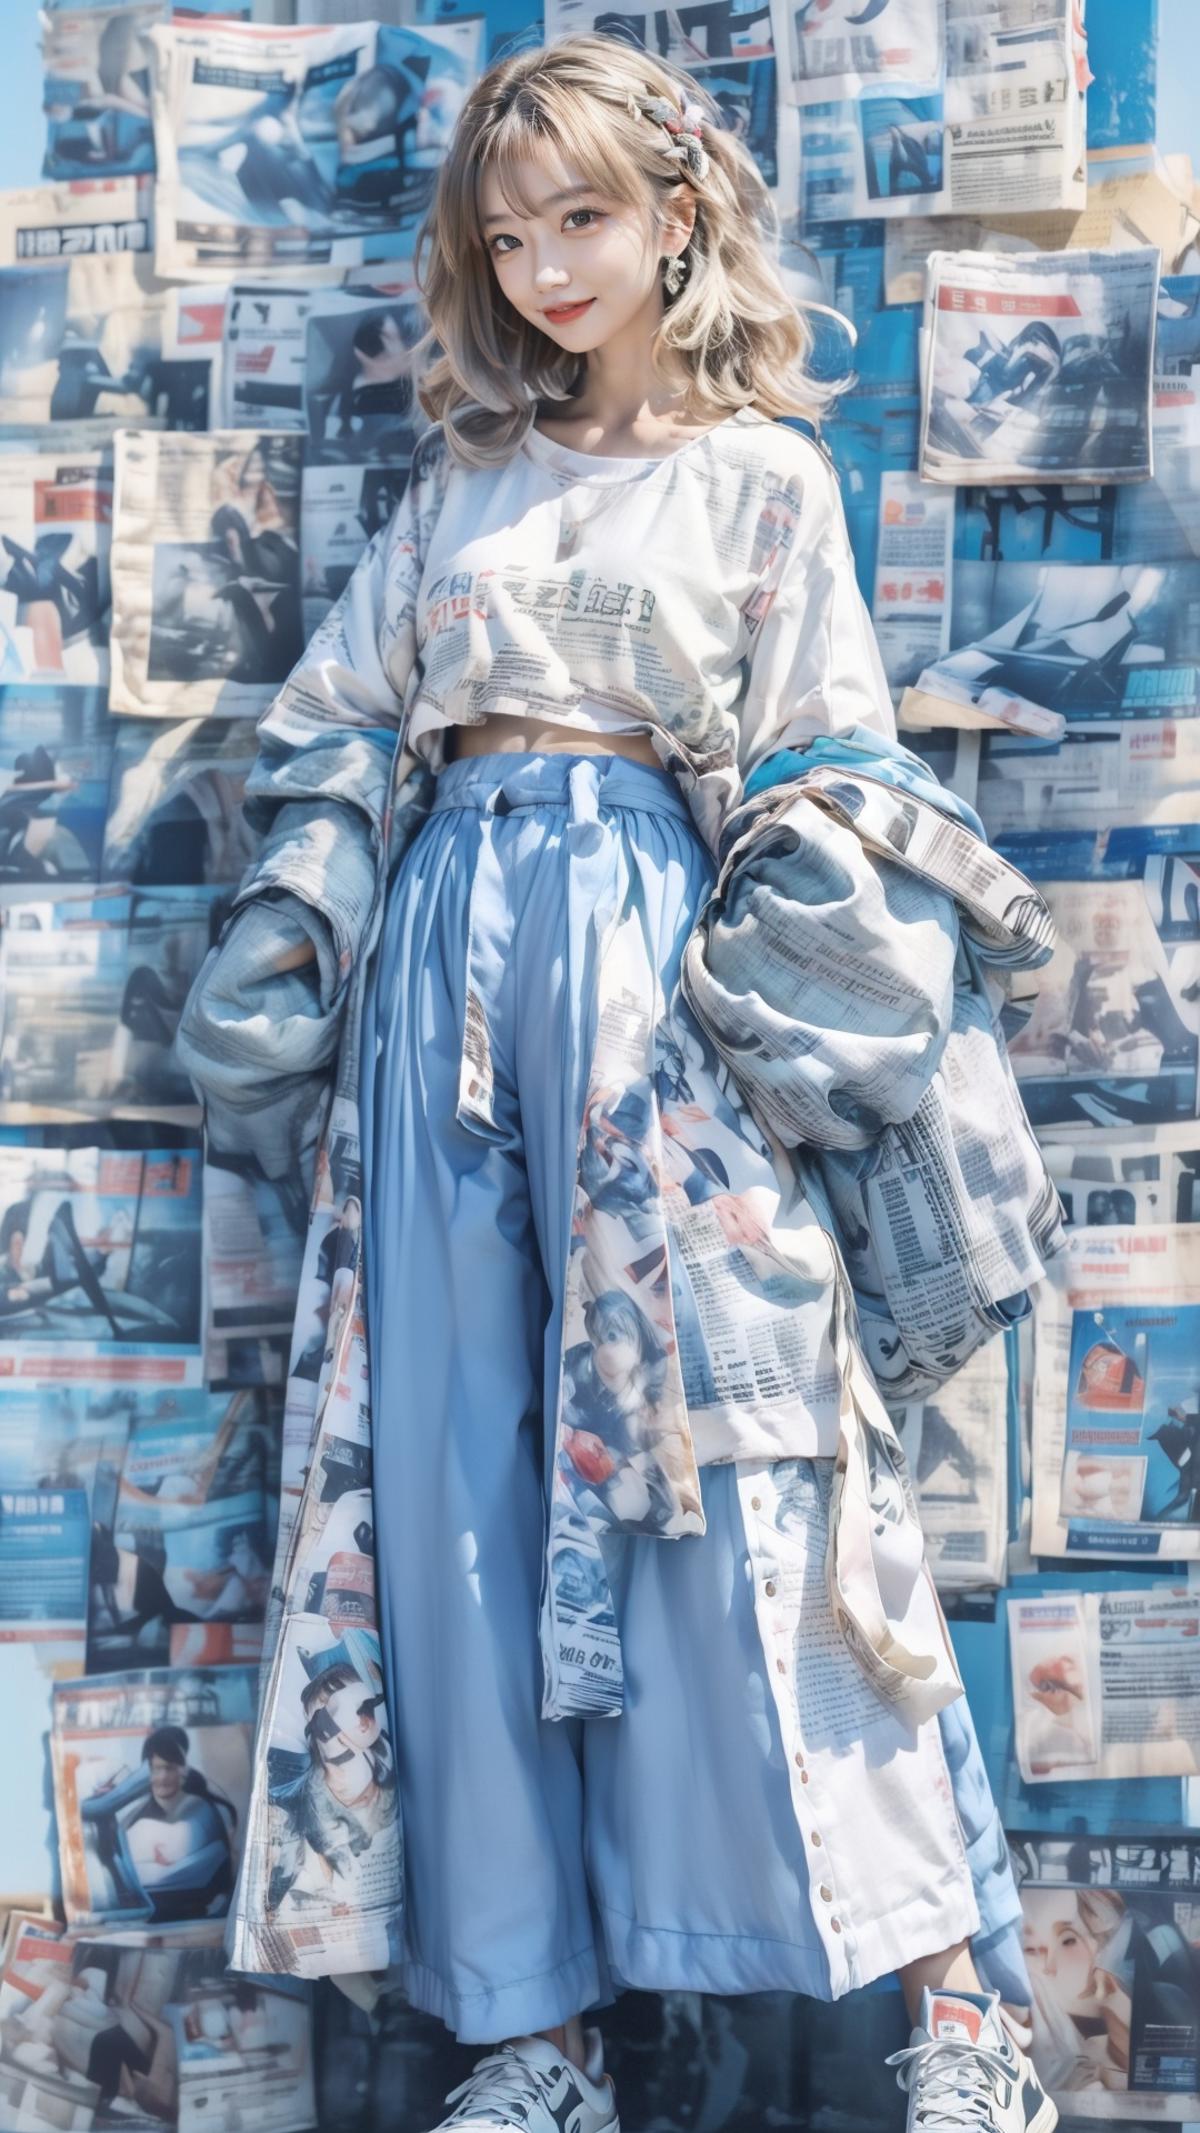 Woman wearing a long coat and blue pants standing in front of a collage of newspaper pages.